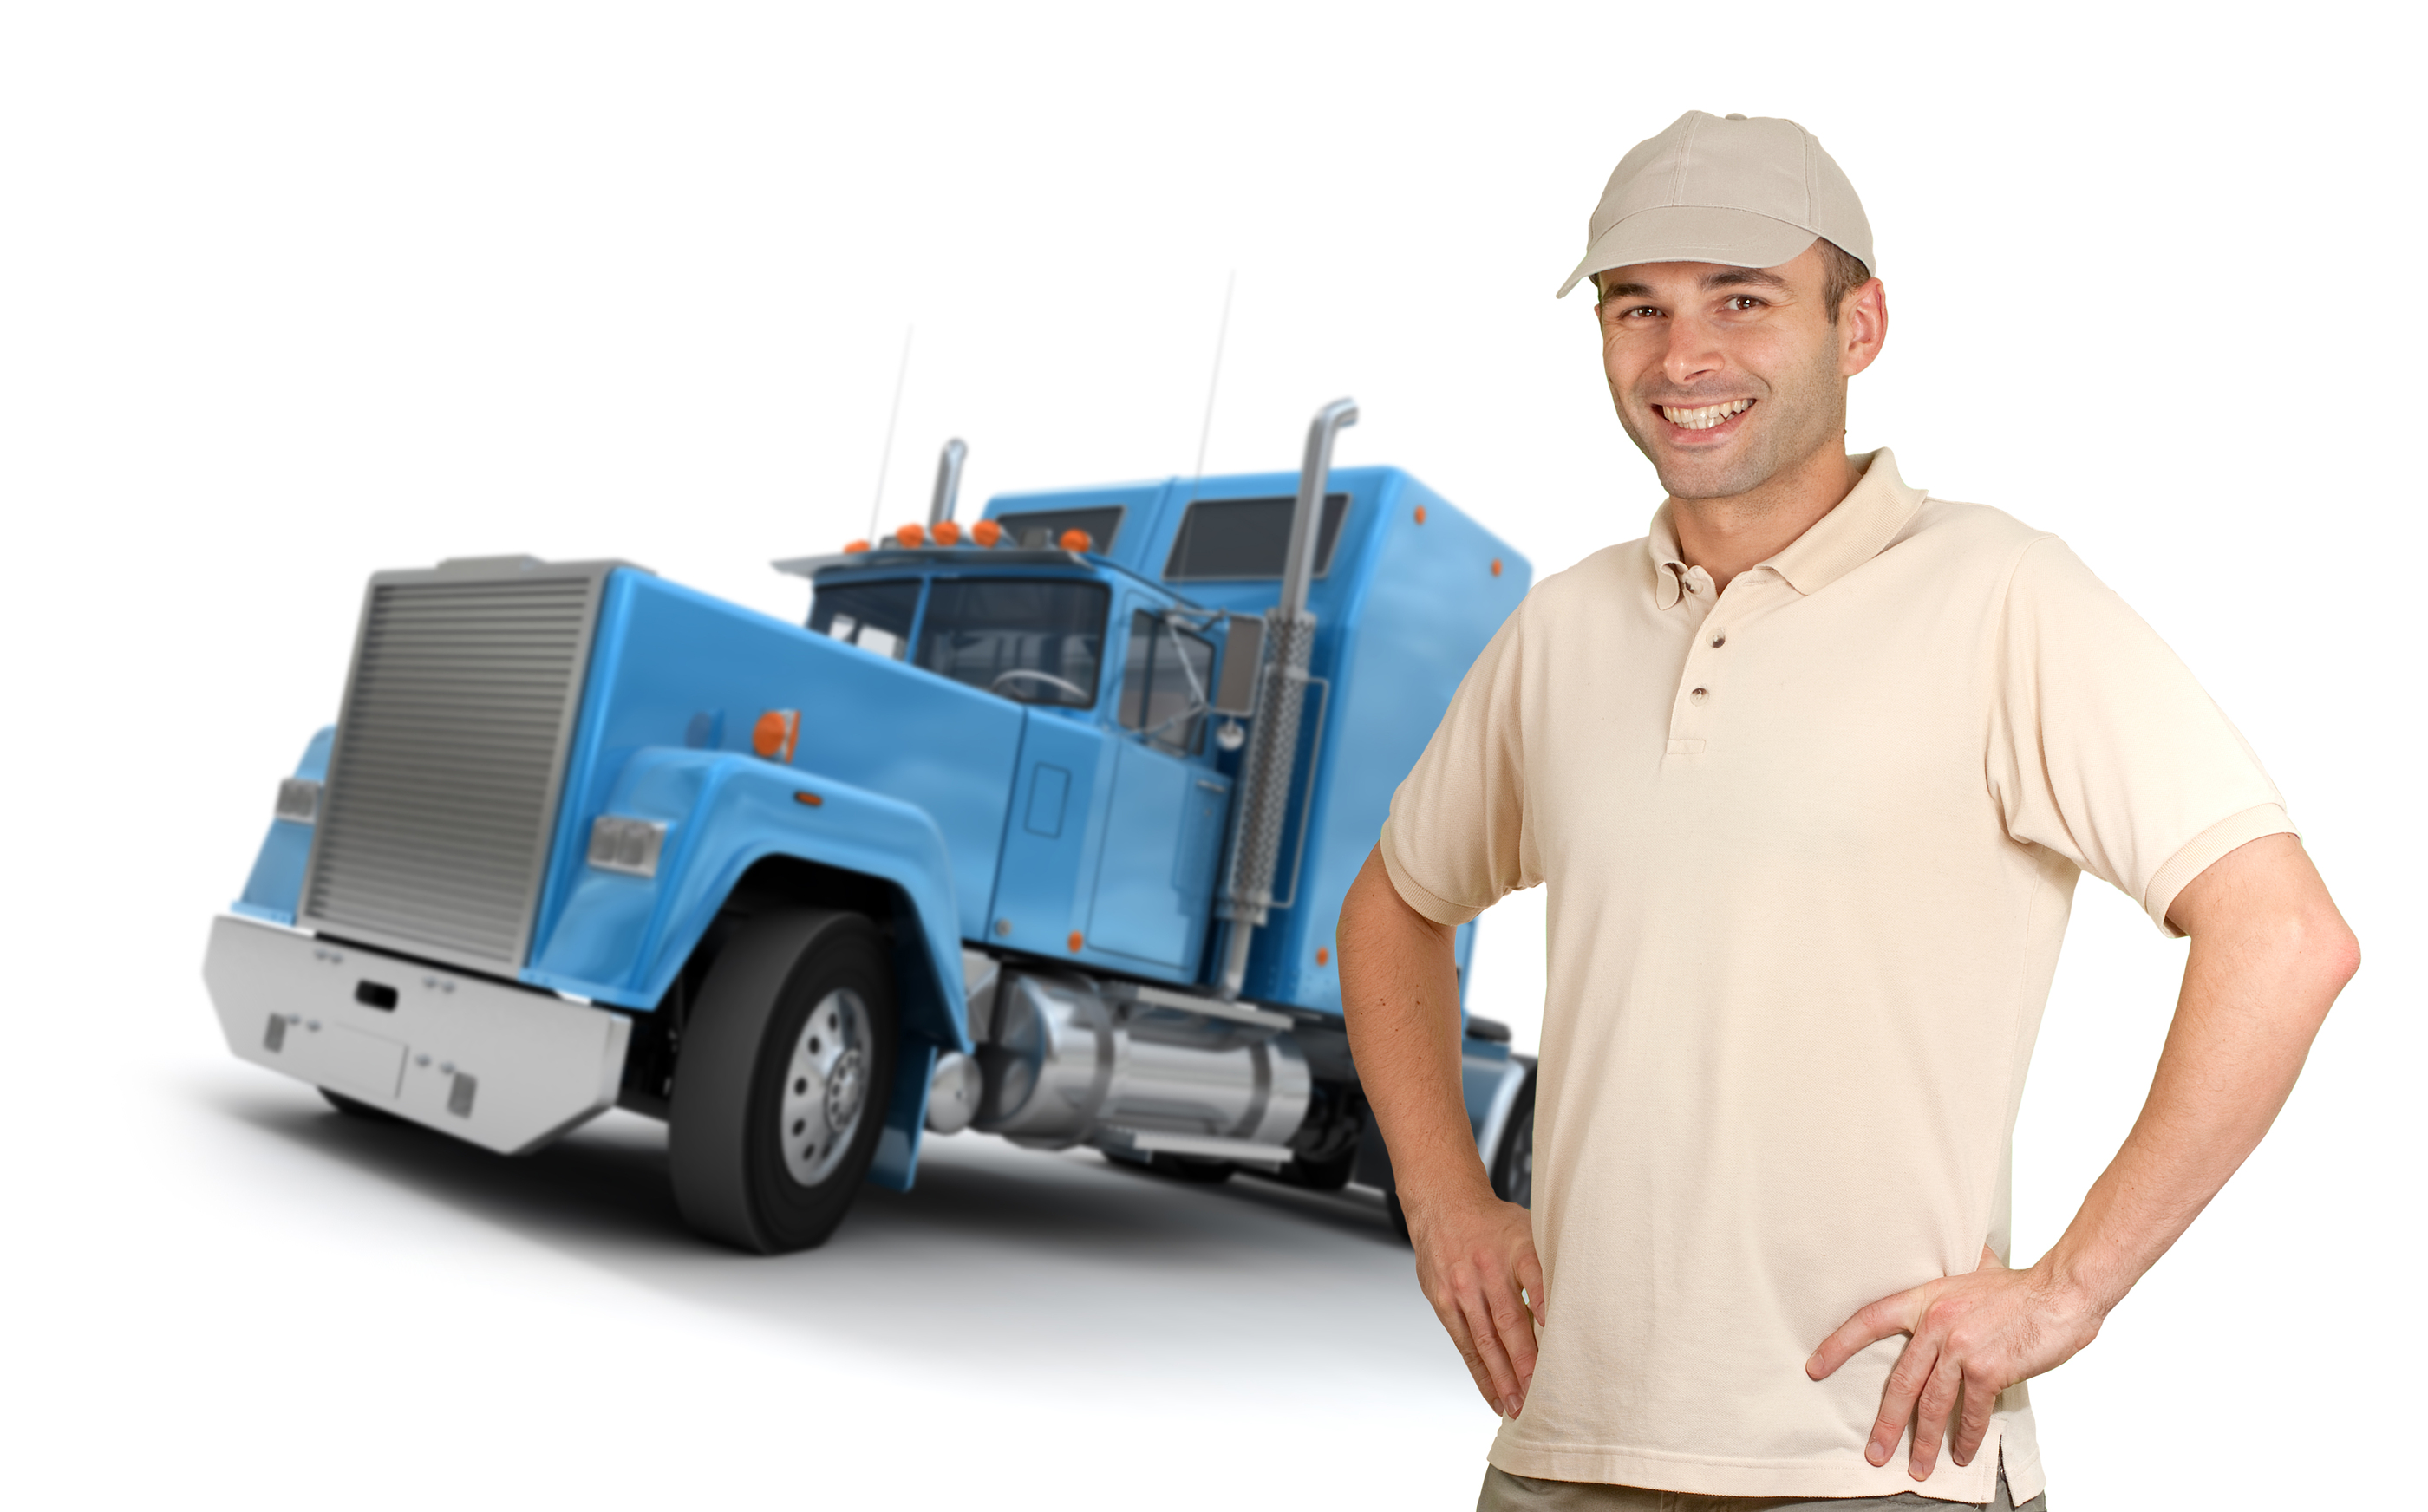 Isolated image of a man in front of a trailer truck